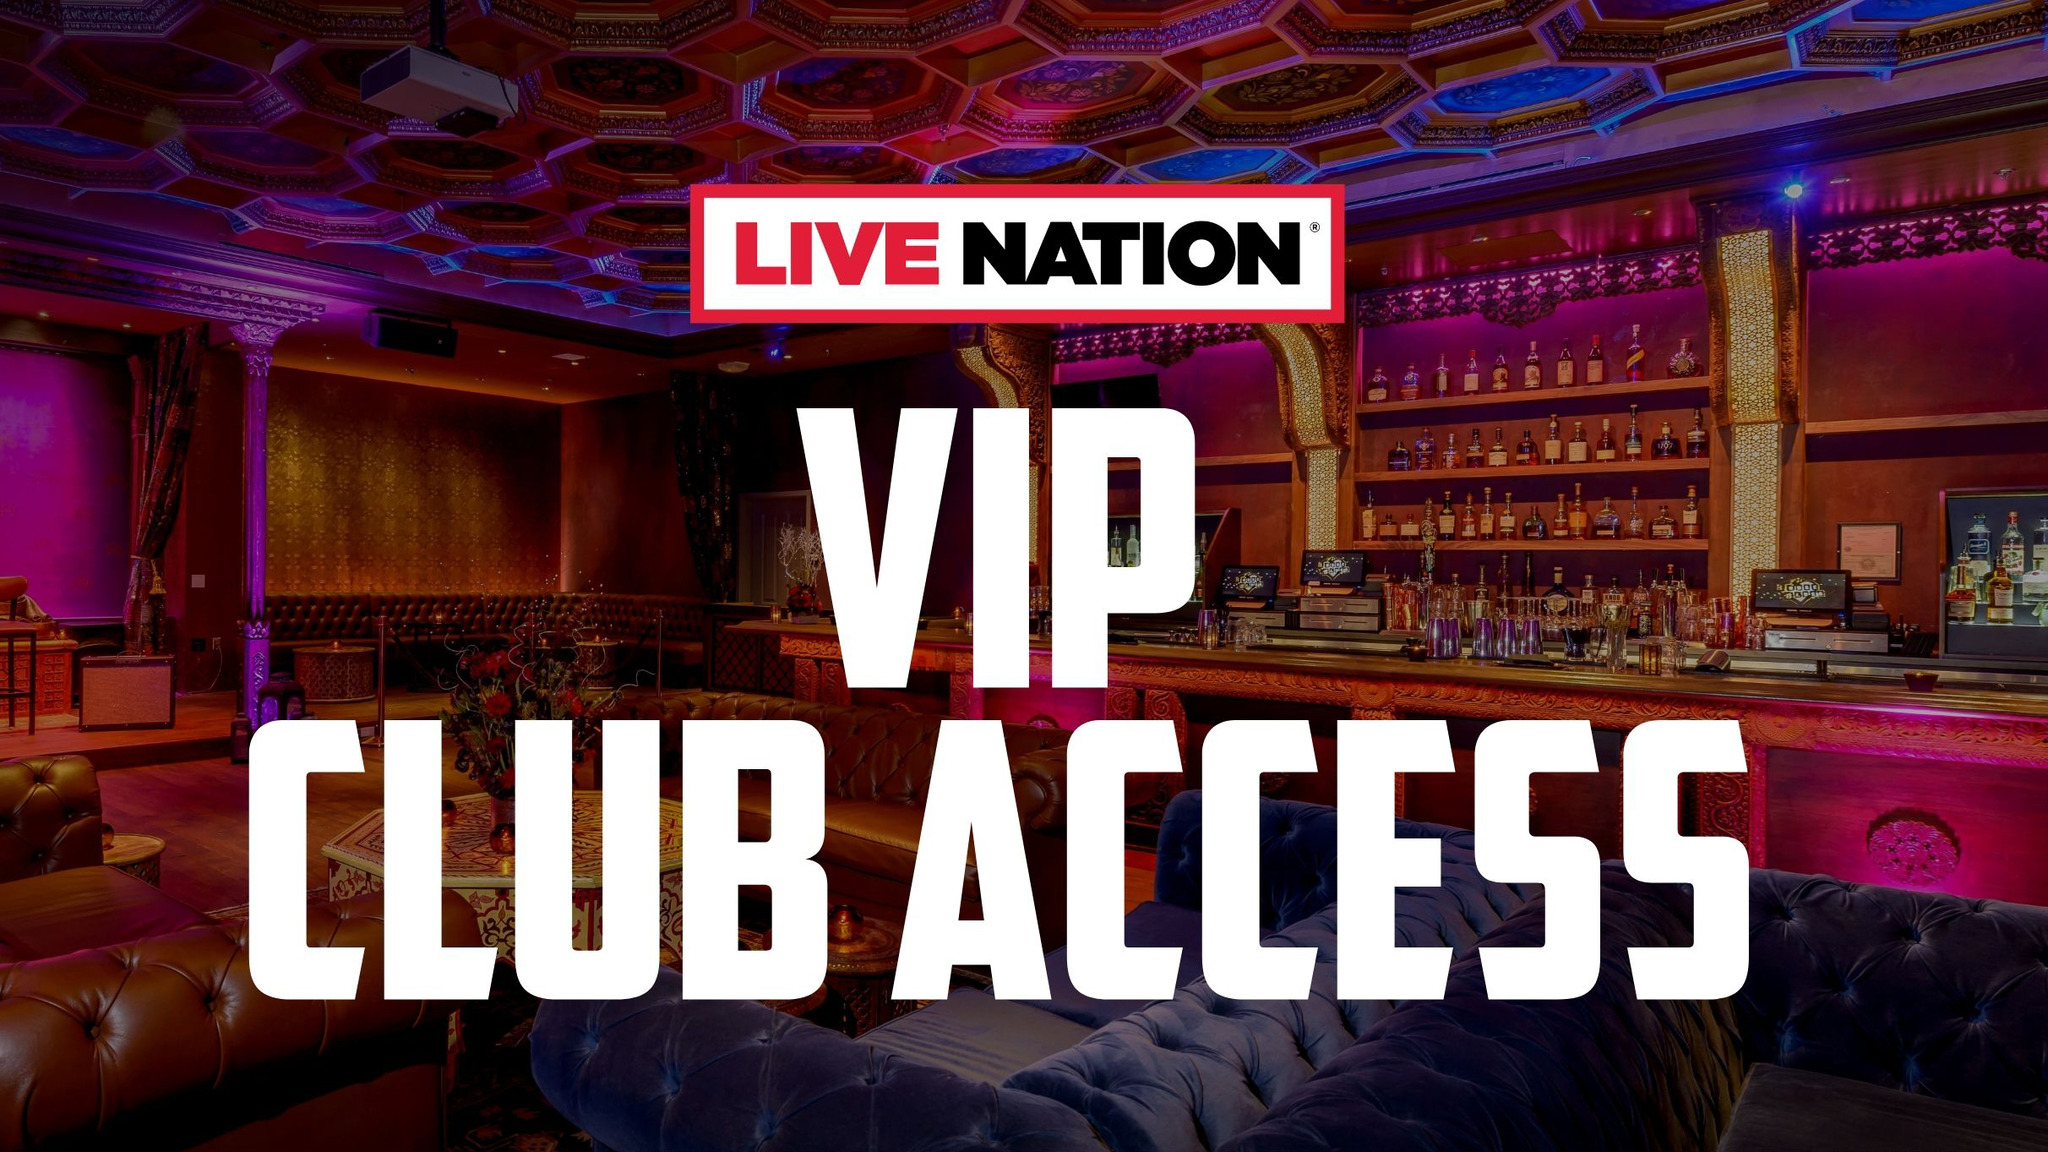 Foundation Room Access HOB Boston Tickets Event Dates & Schedule